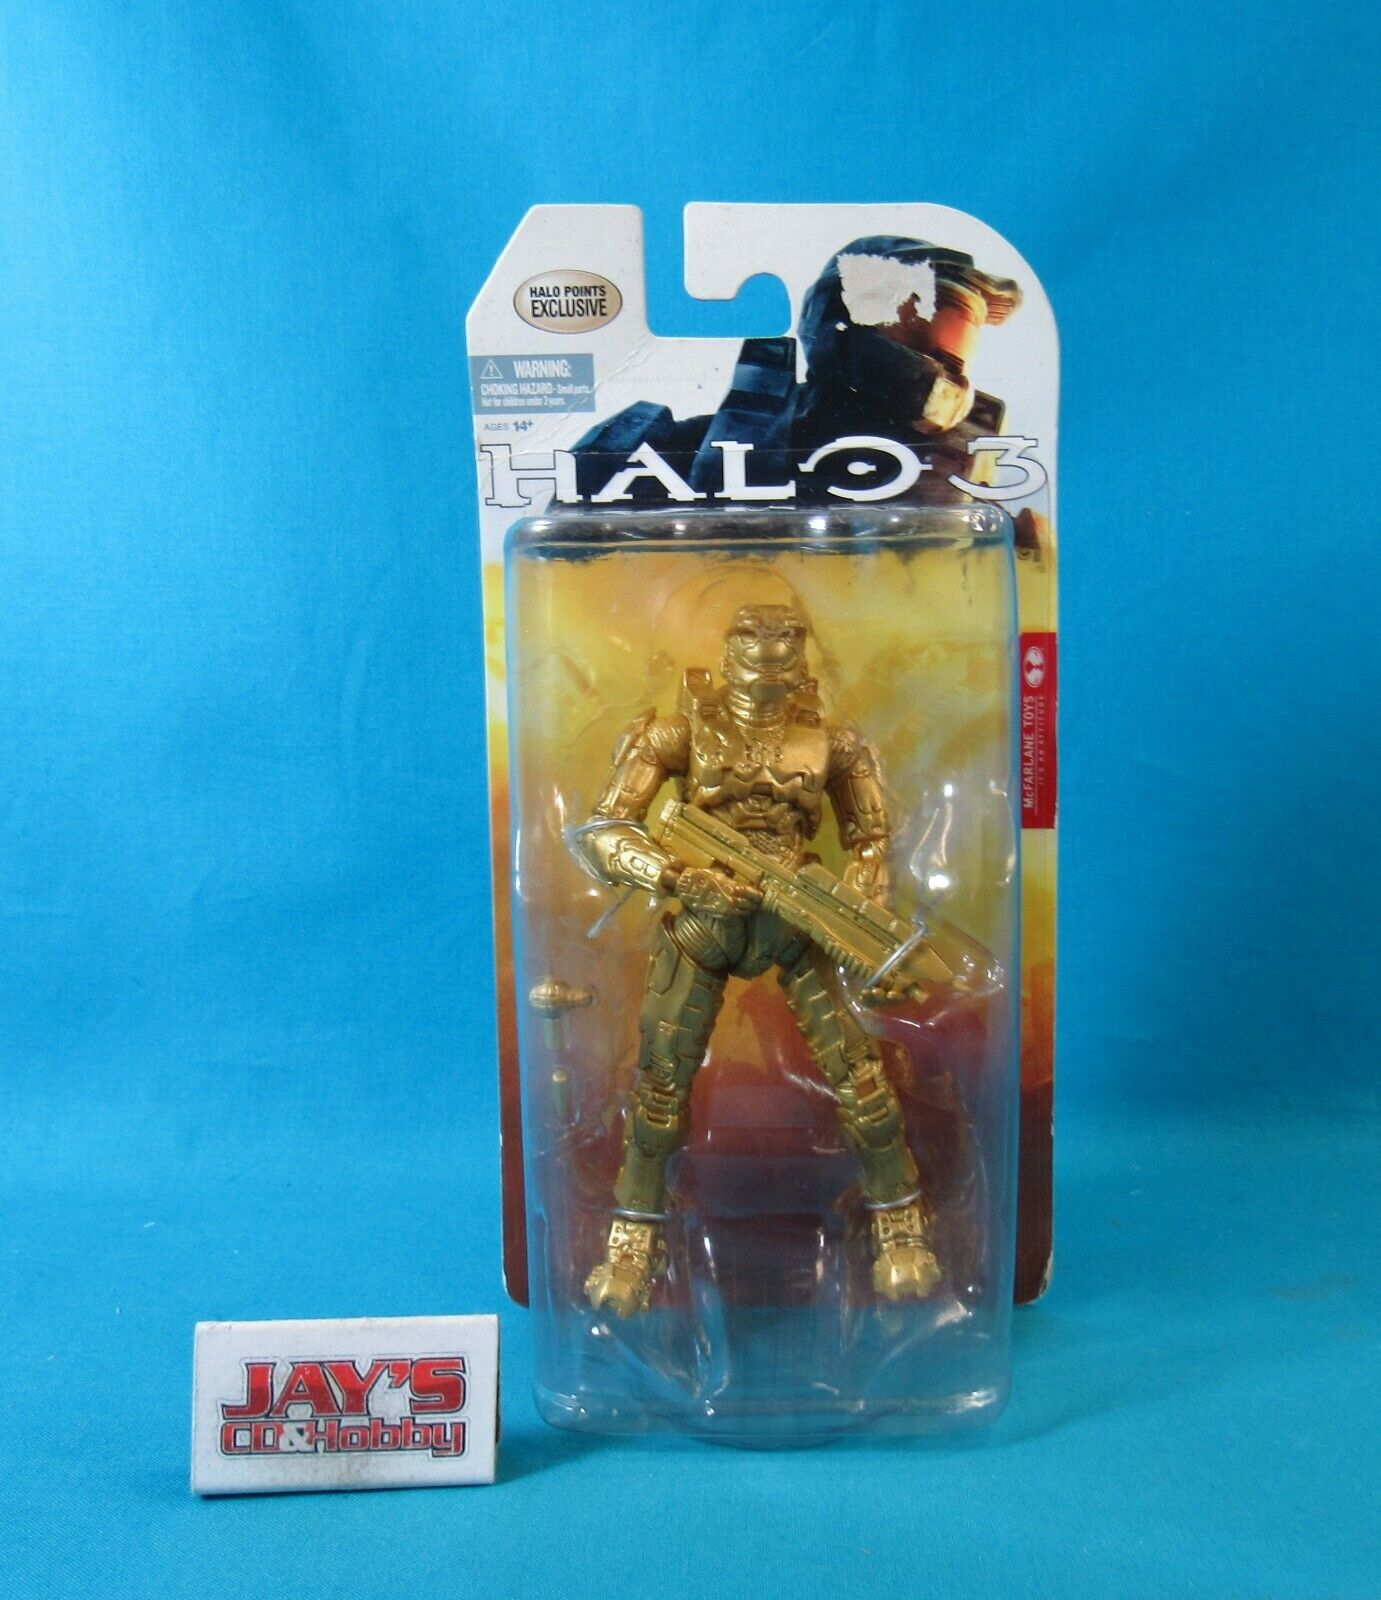 Gold Master Chief 5" Action Figure Halo 3 2008 McFarlane Toys New on Card